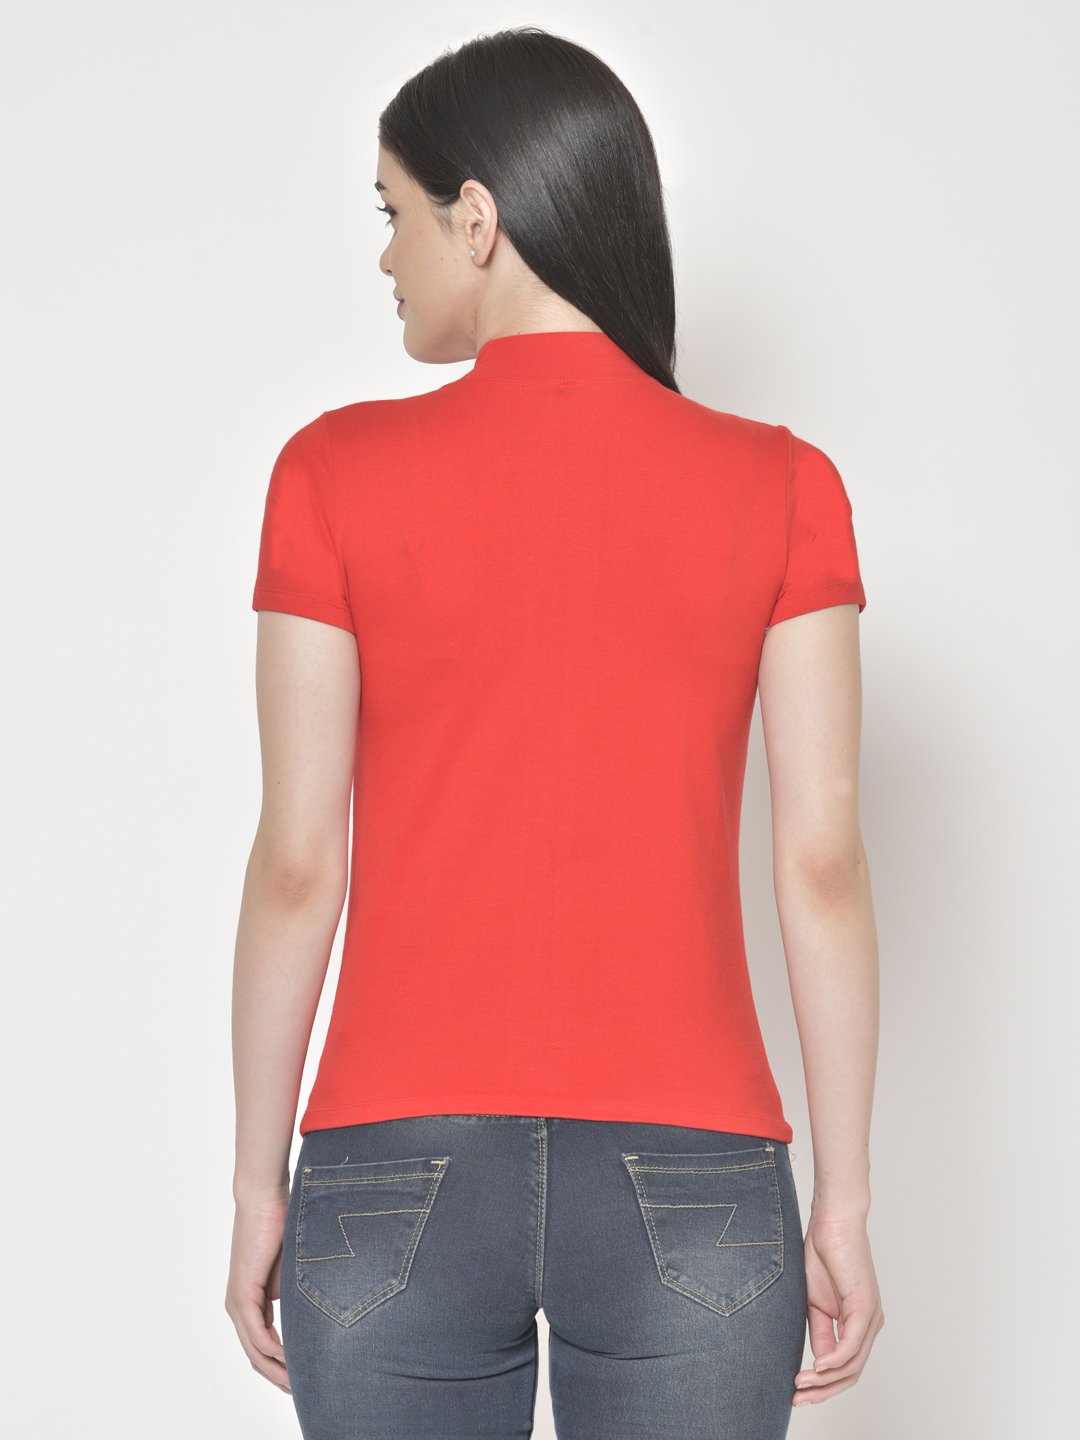 Cation Red Cotton Top